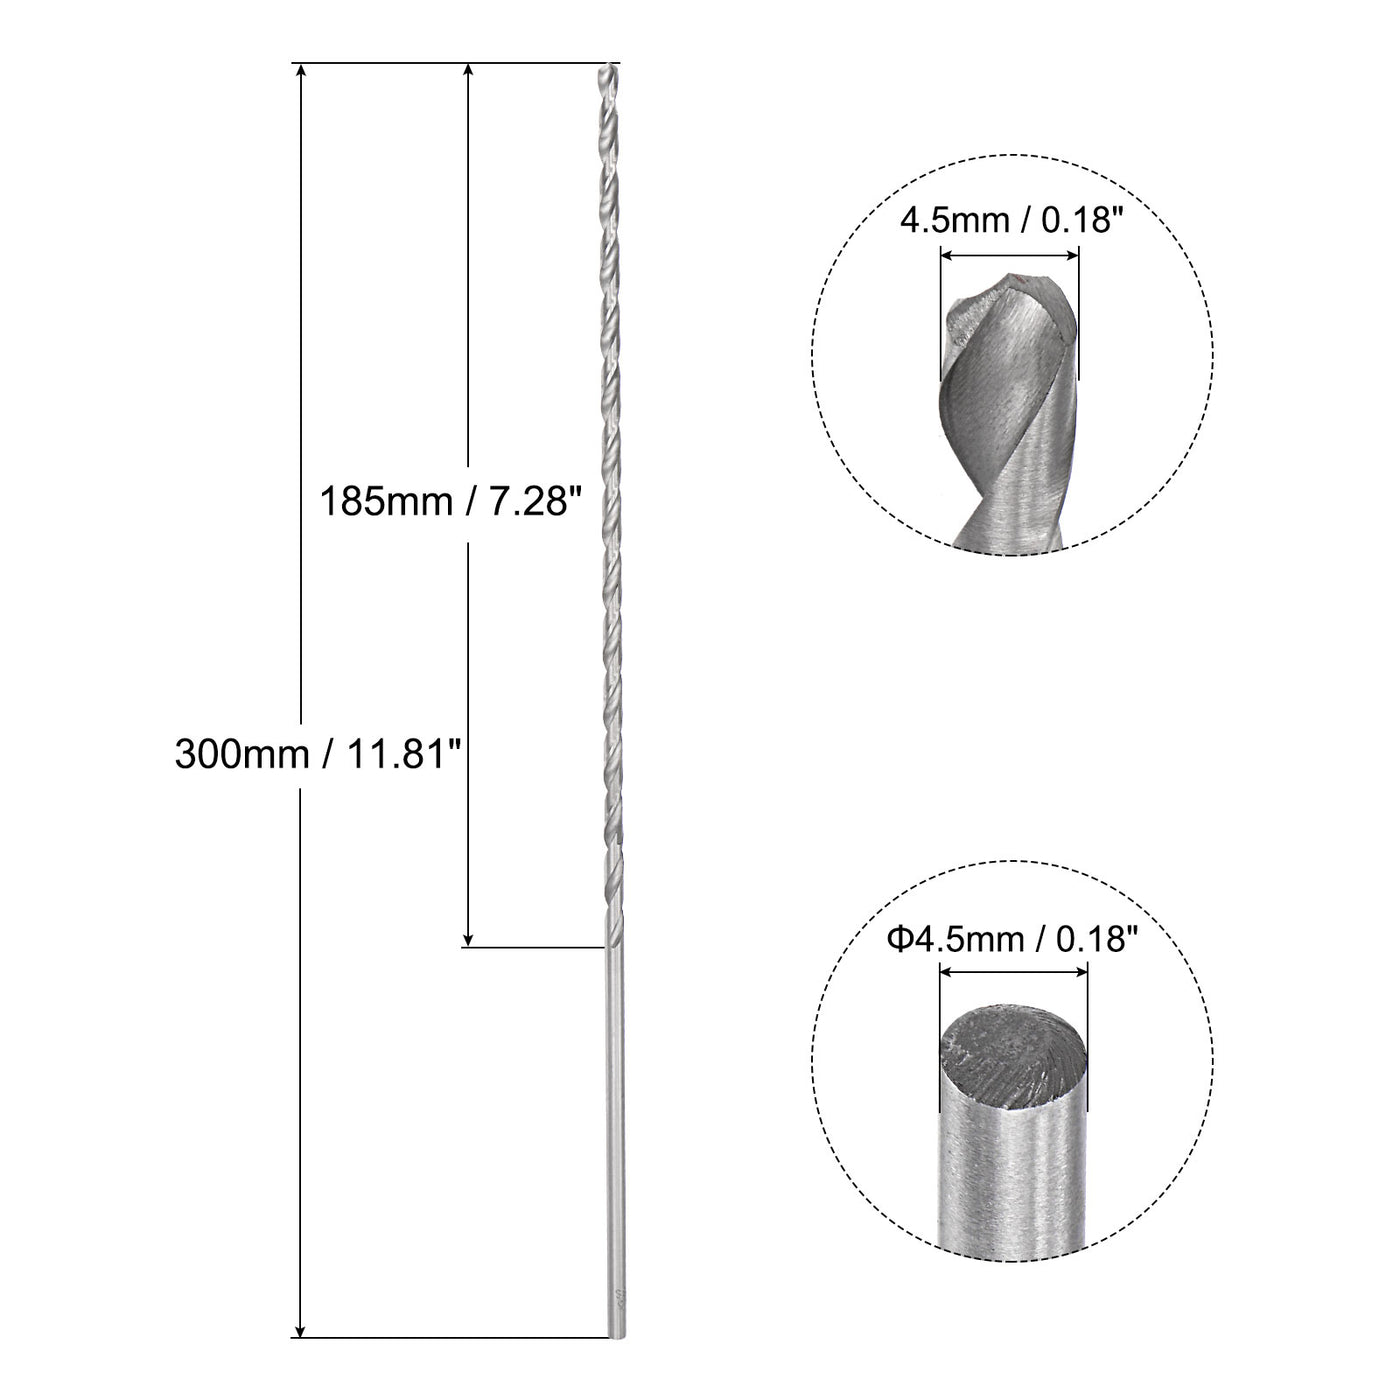 uxcell Uxcell 4.5mm Twist Drill Bits, High-Speed Steel Extra Long Drill Bit 300mm Length